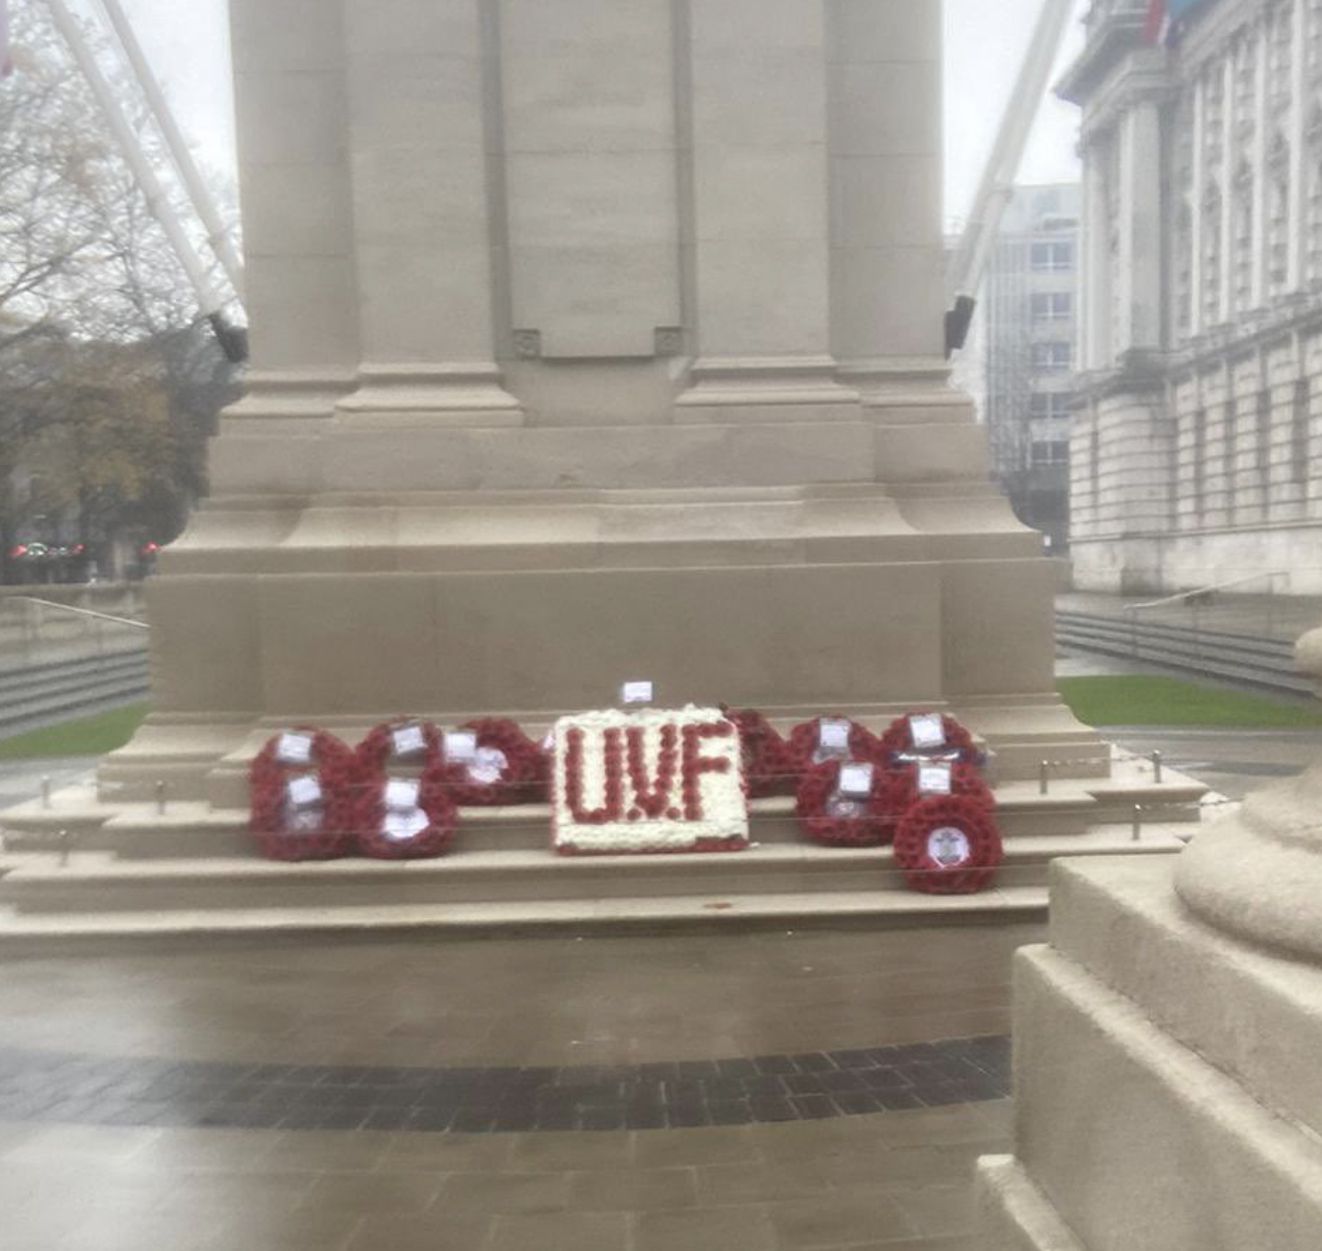 PROMINENT: The UVF wreath was at the Cenotaph during the official Belfast City Council ceremony